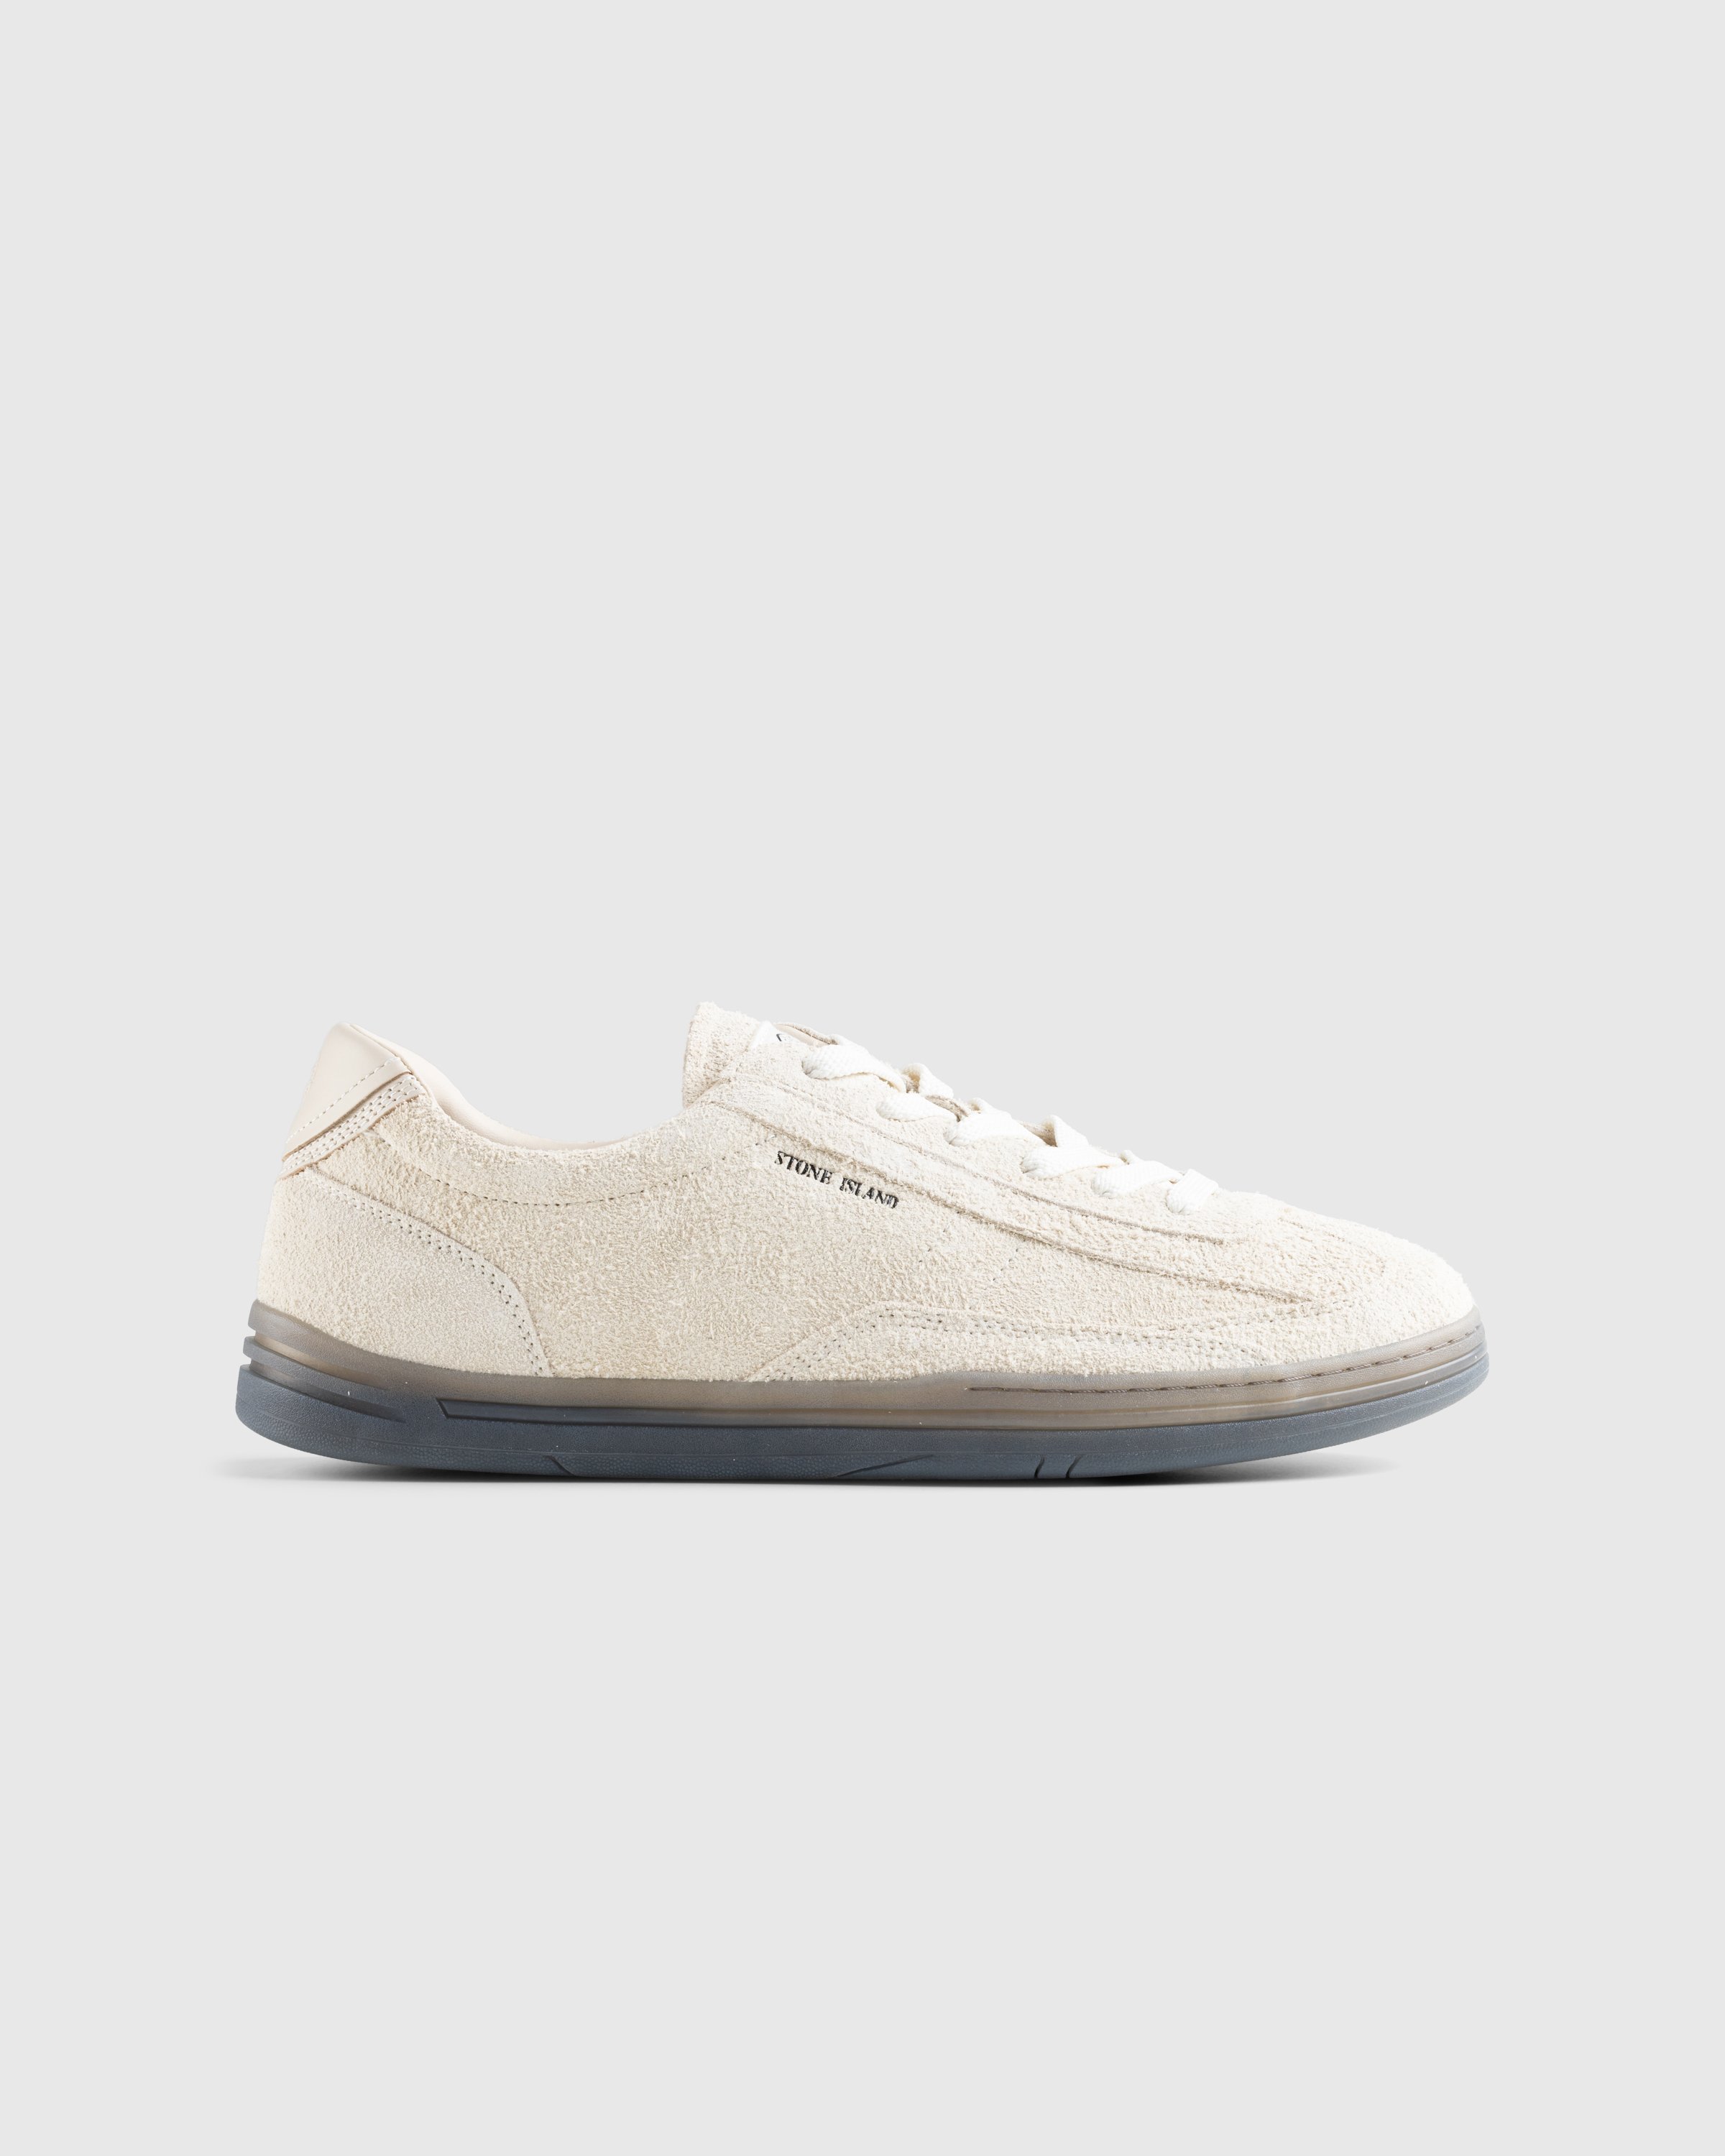 Off-White Paneled Sneakers by Stone Island on Sale